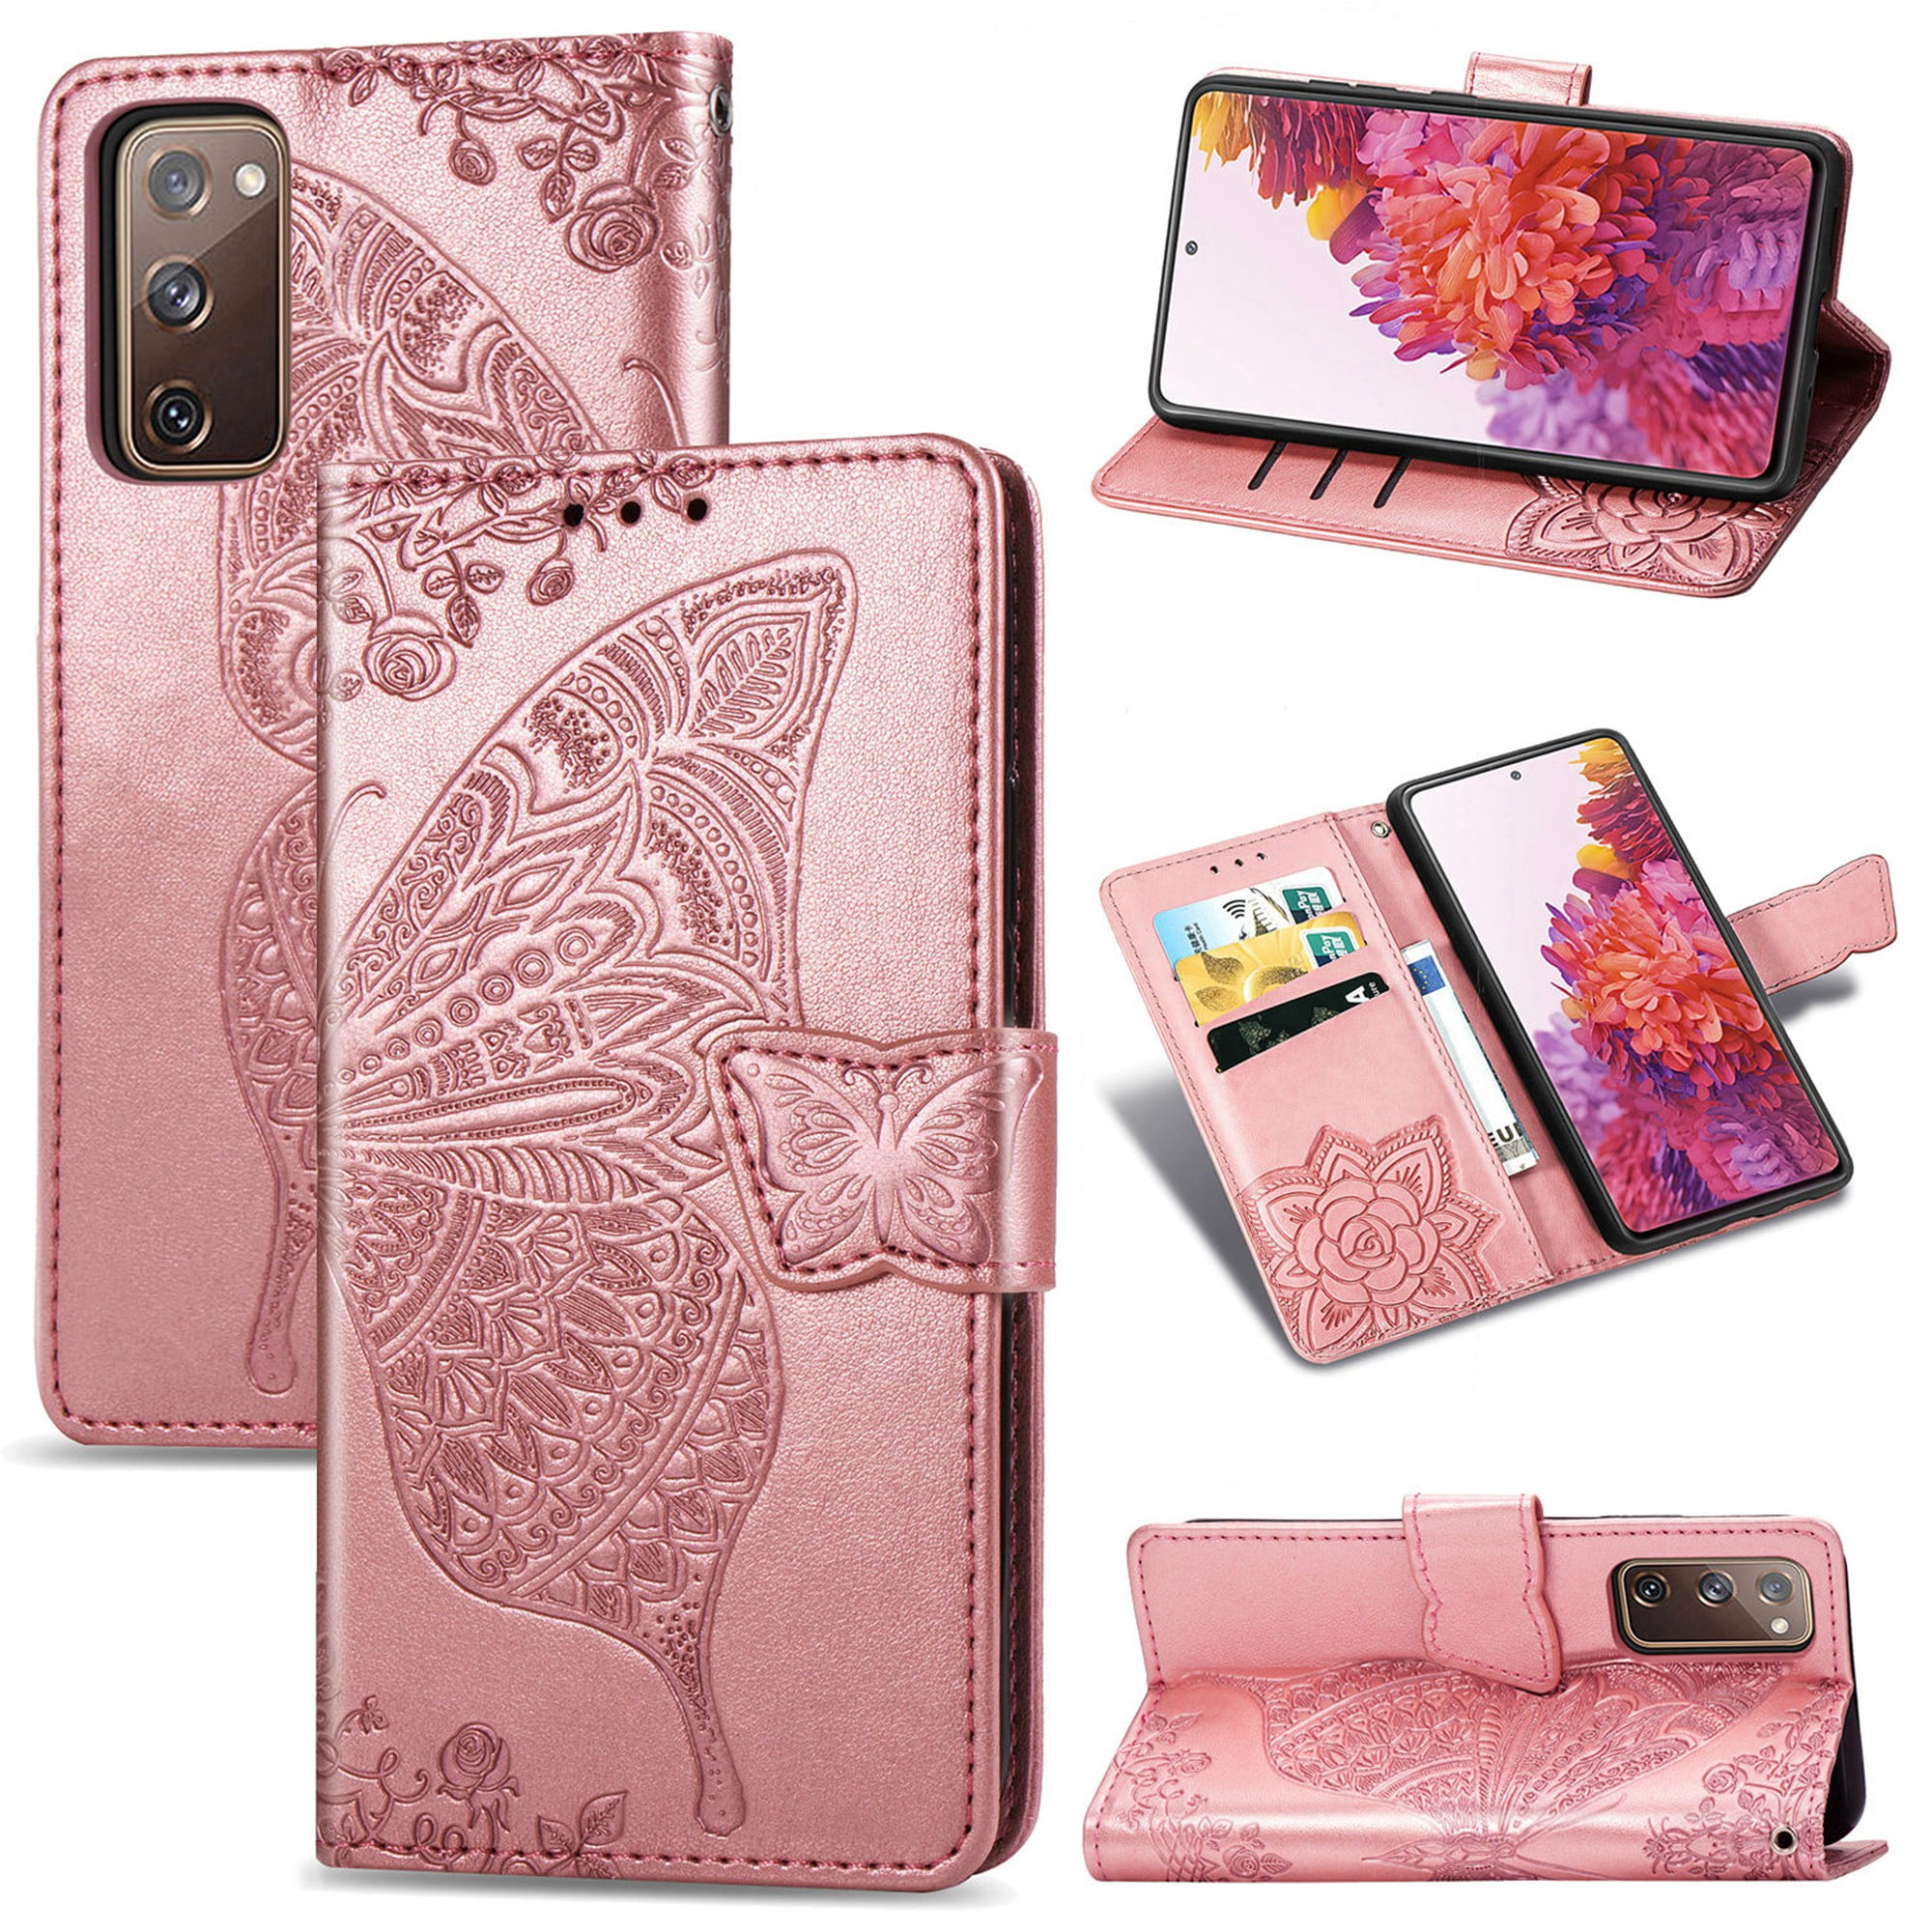 Dteck Case for Samsung Galaxy S20 FE(6.5 inches),Butterfly Patterned ...